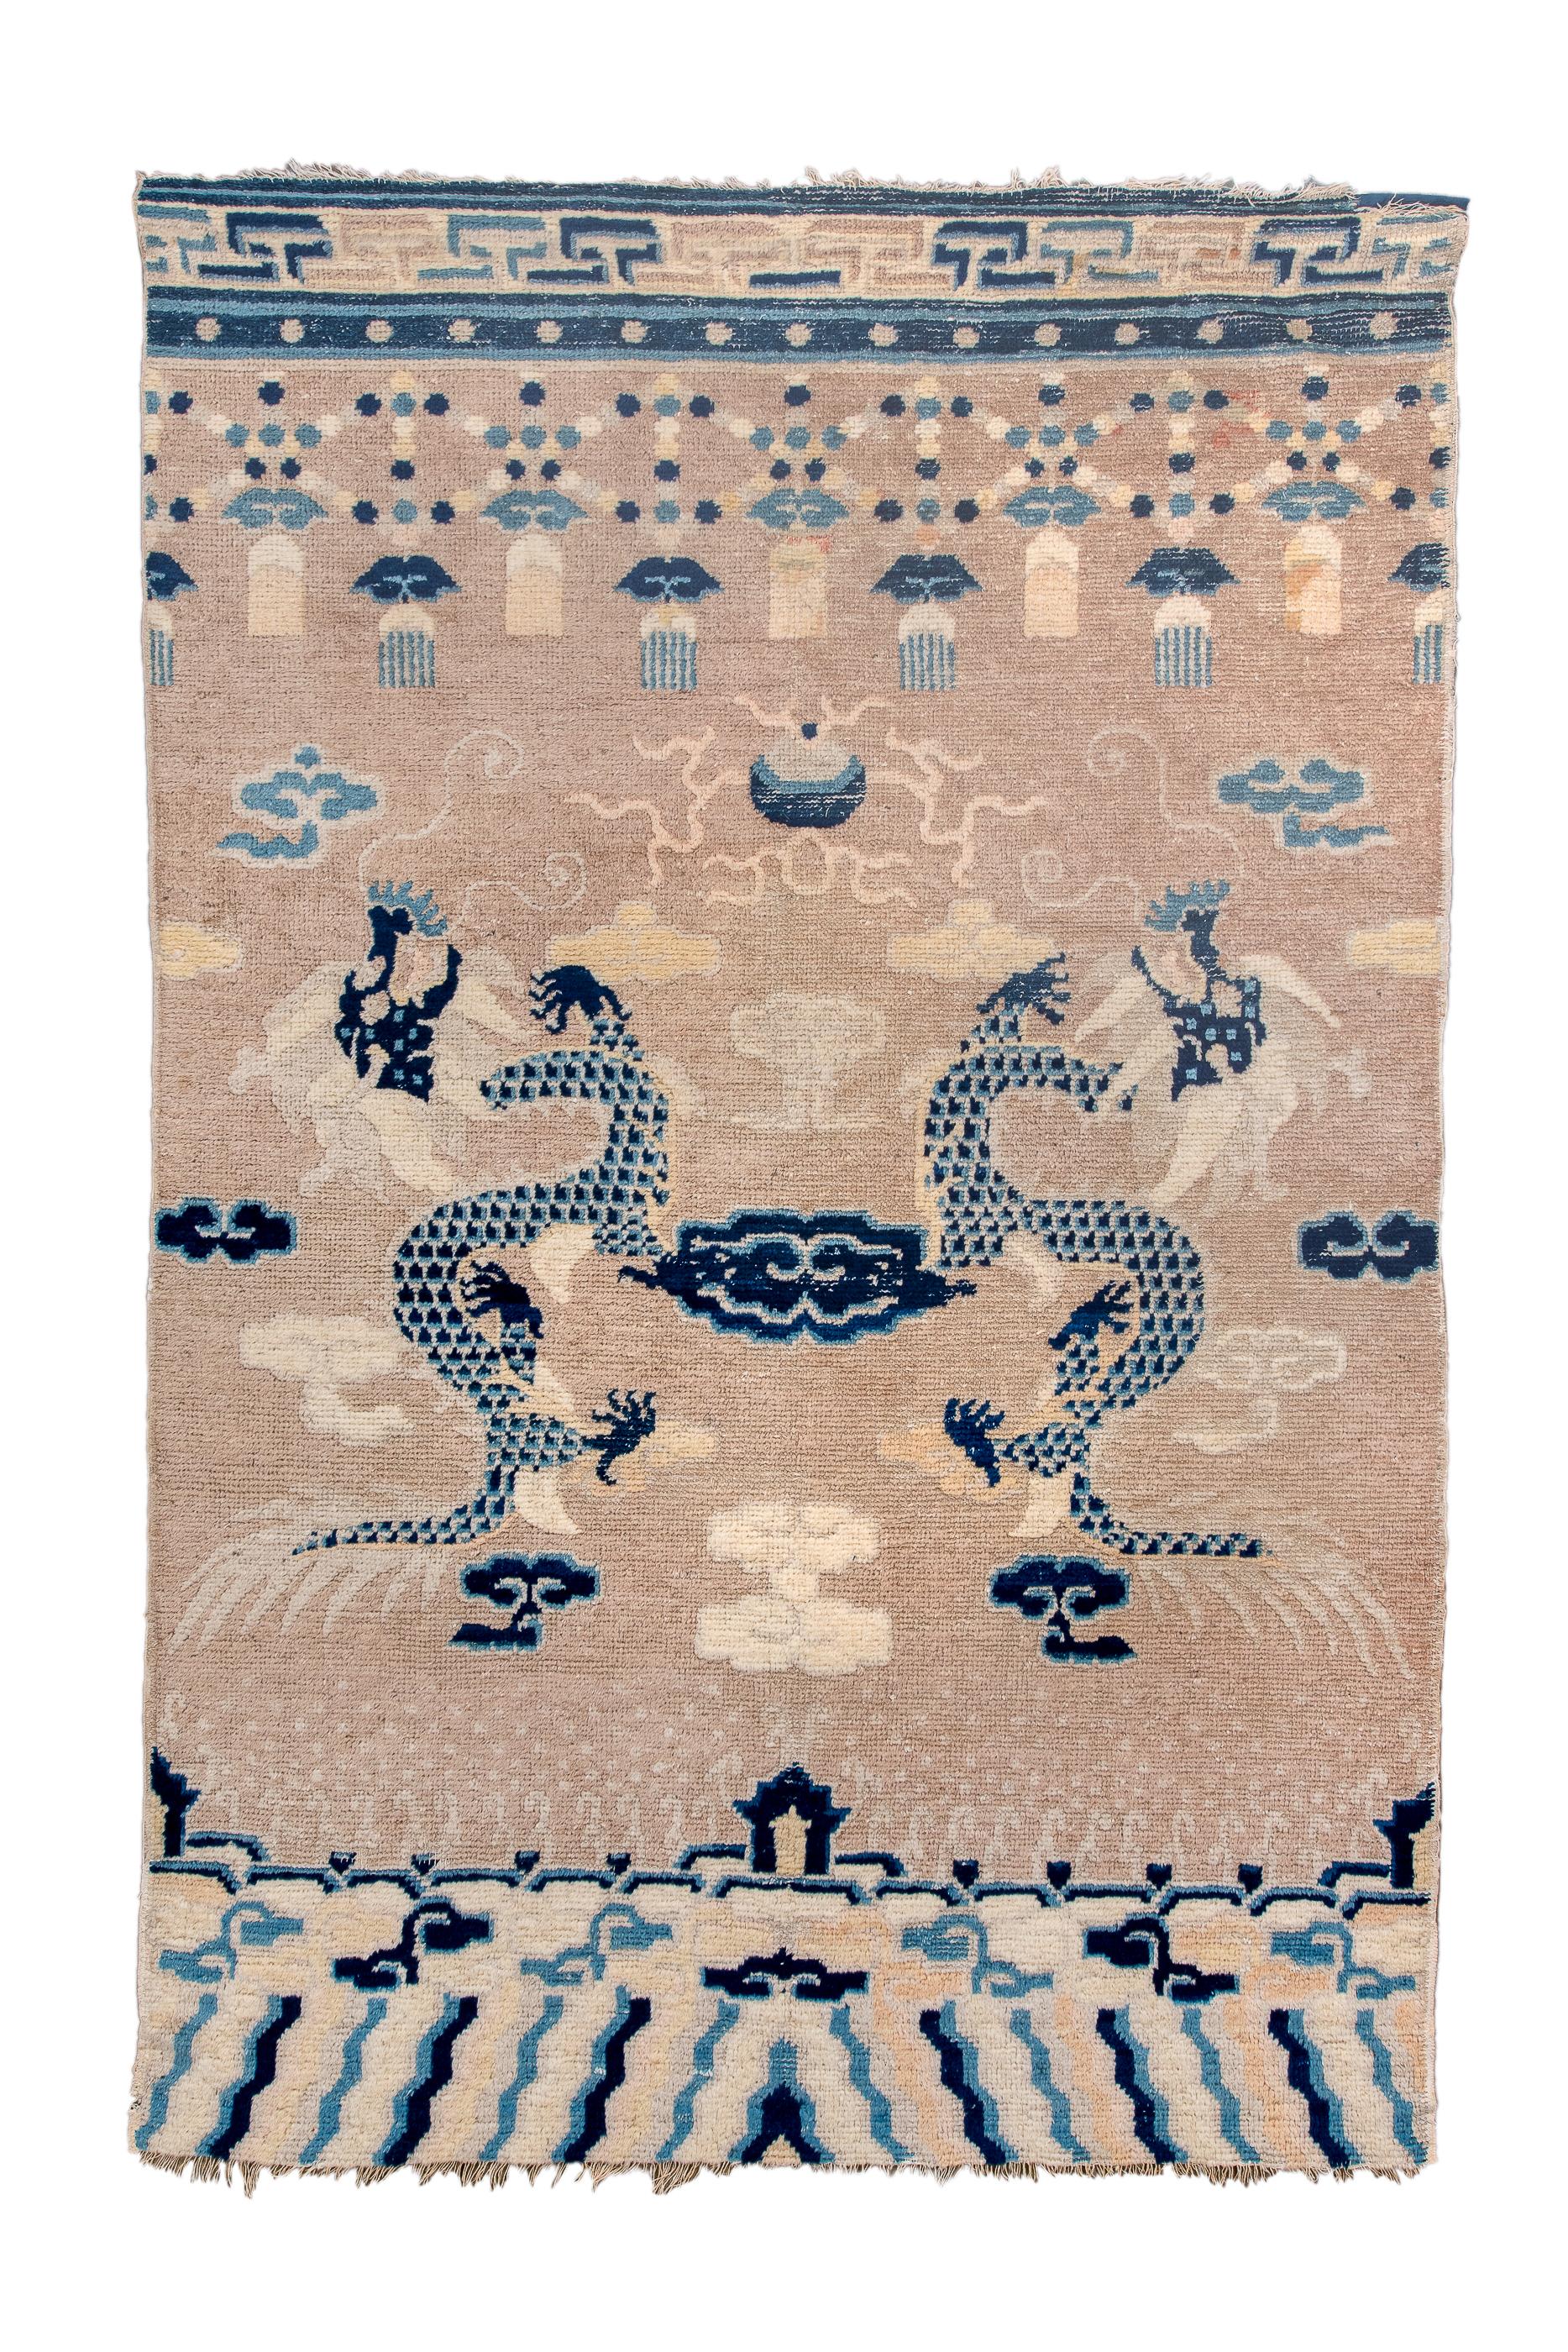 Ningxia Pillar rug, XIX century. This special hand knotted carpet was wrapped around a pillar or a column of the buddhis temples or in the imperial palaces in China, Mongolia and Tibet ( in Tibet they were called Katum). This carpet surrounds the